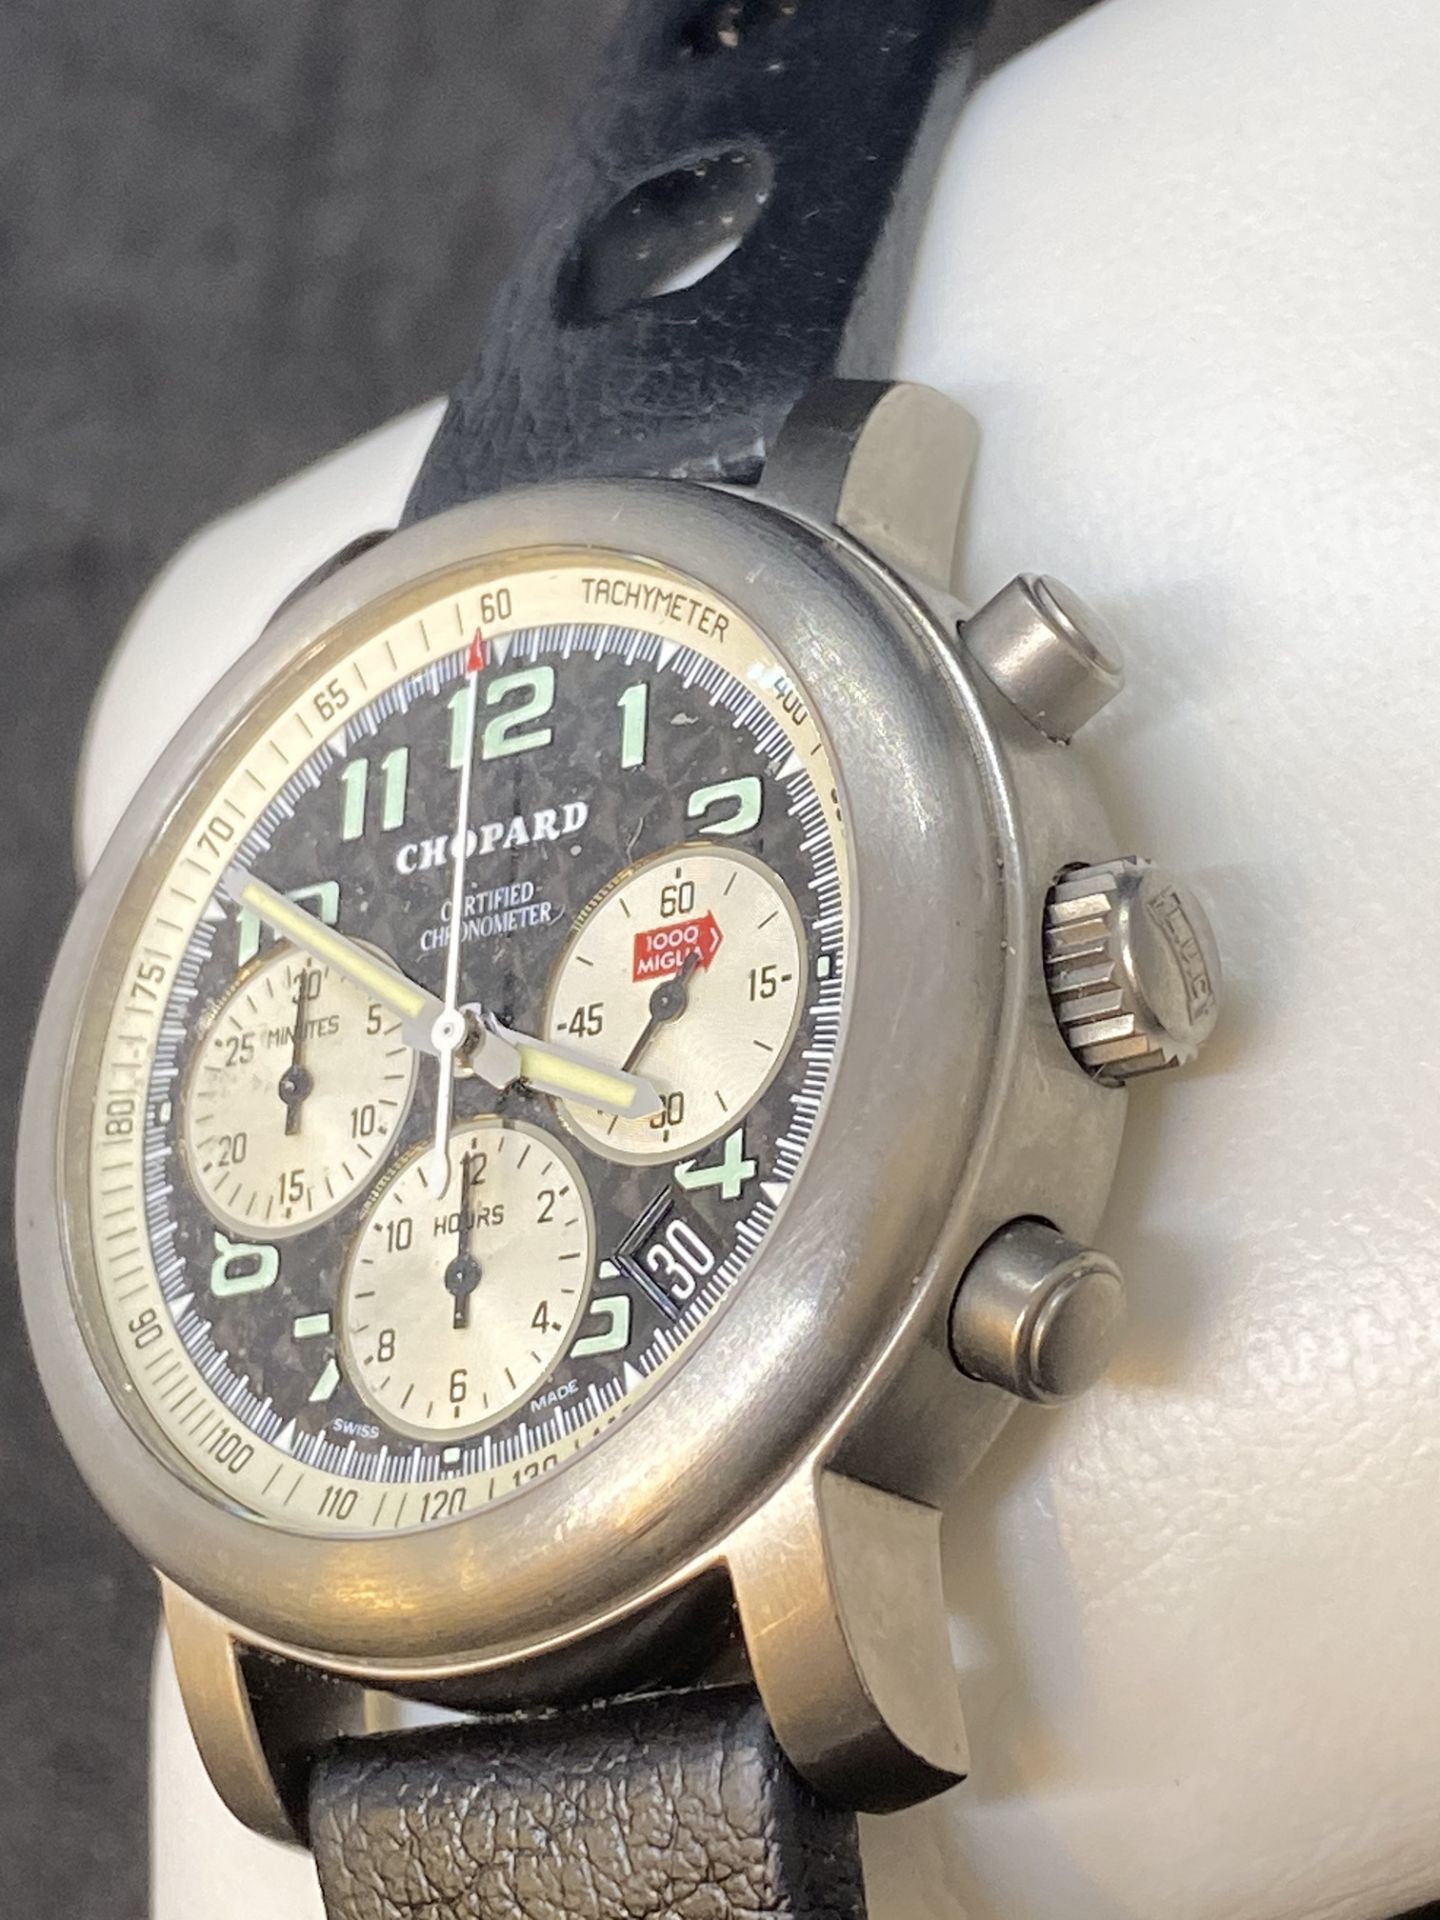 GENTS CHOPARD CHRONOGRAPH WATCH - Image 5 of 8